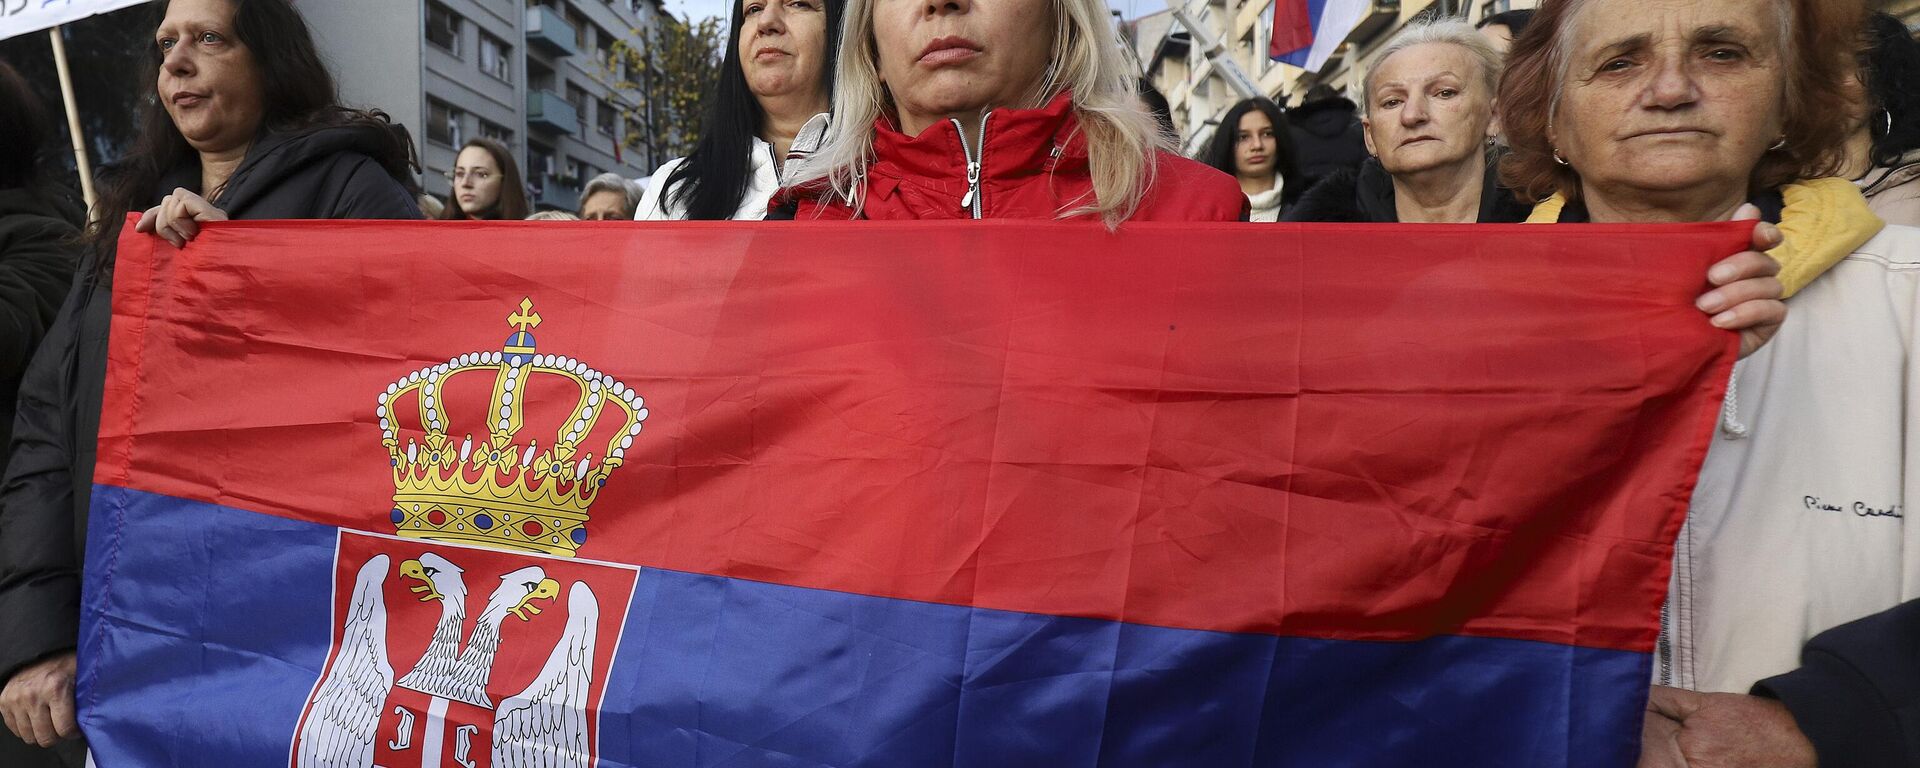 Women hold Serbia's flag as they march in the northern part of Kosovska Mitrovica, Kosovo, Wednesday, Nov. 23, 2022. Serbs in the northern part of Kosovska Mitrovica protested against planned fines by Kosovo authorities for those who refuse to change their Belgrade issued vehicle registration plates and against the cruelty they say are facing daily from the authorities in Pristina. - Sputnik International, 1920, 07.01.2023